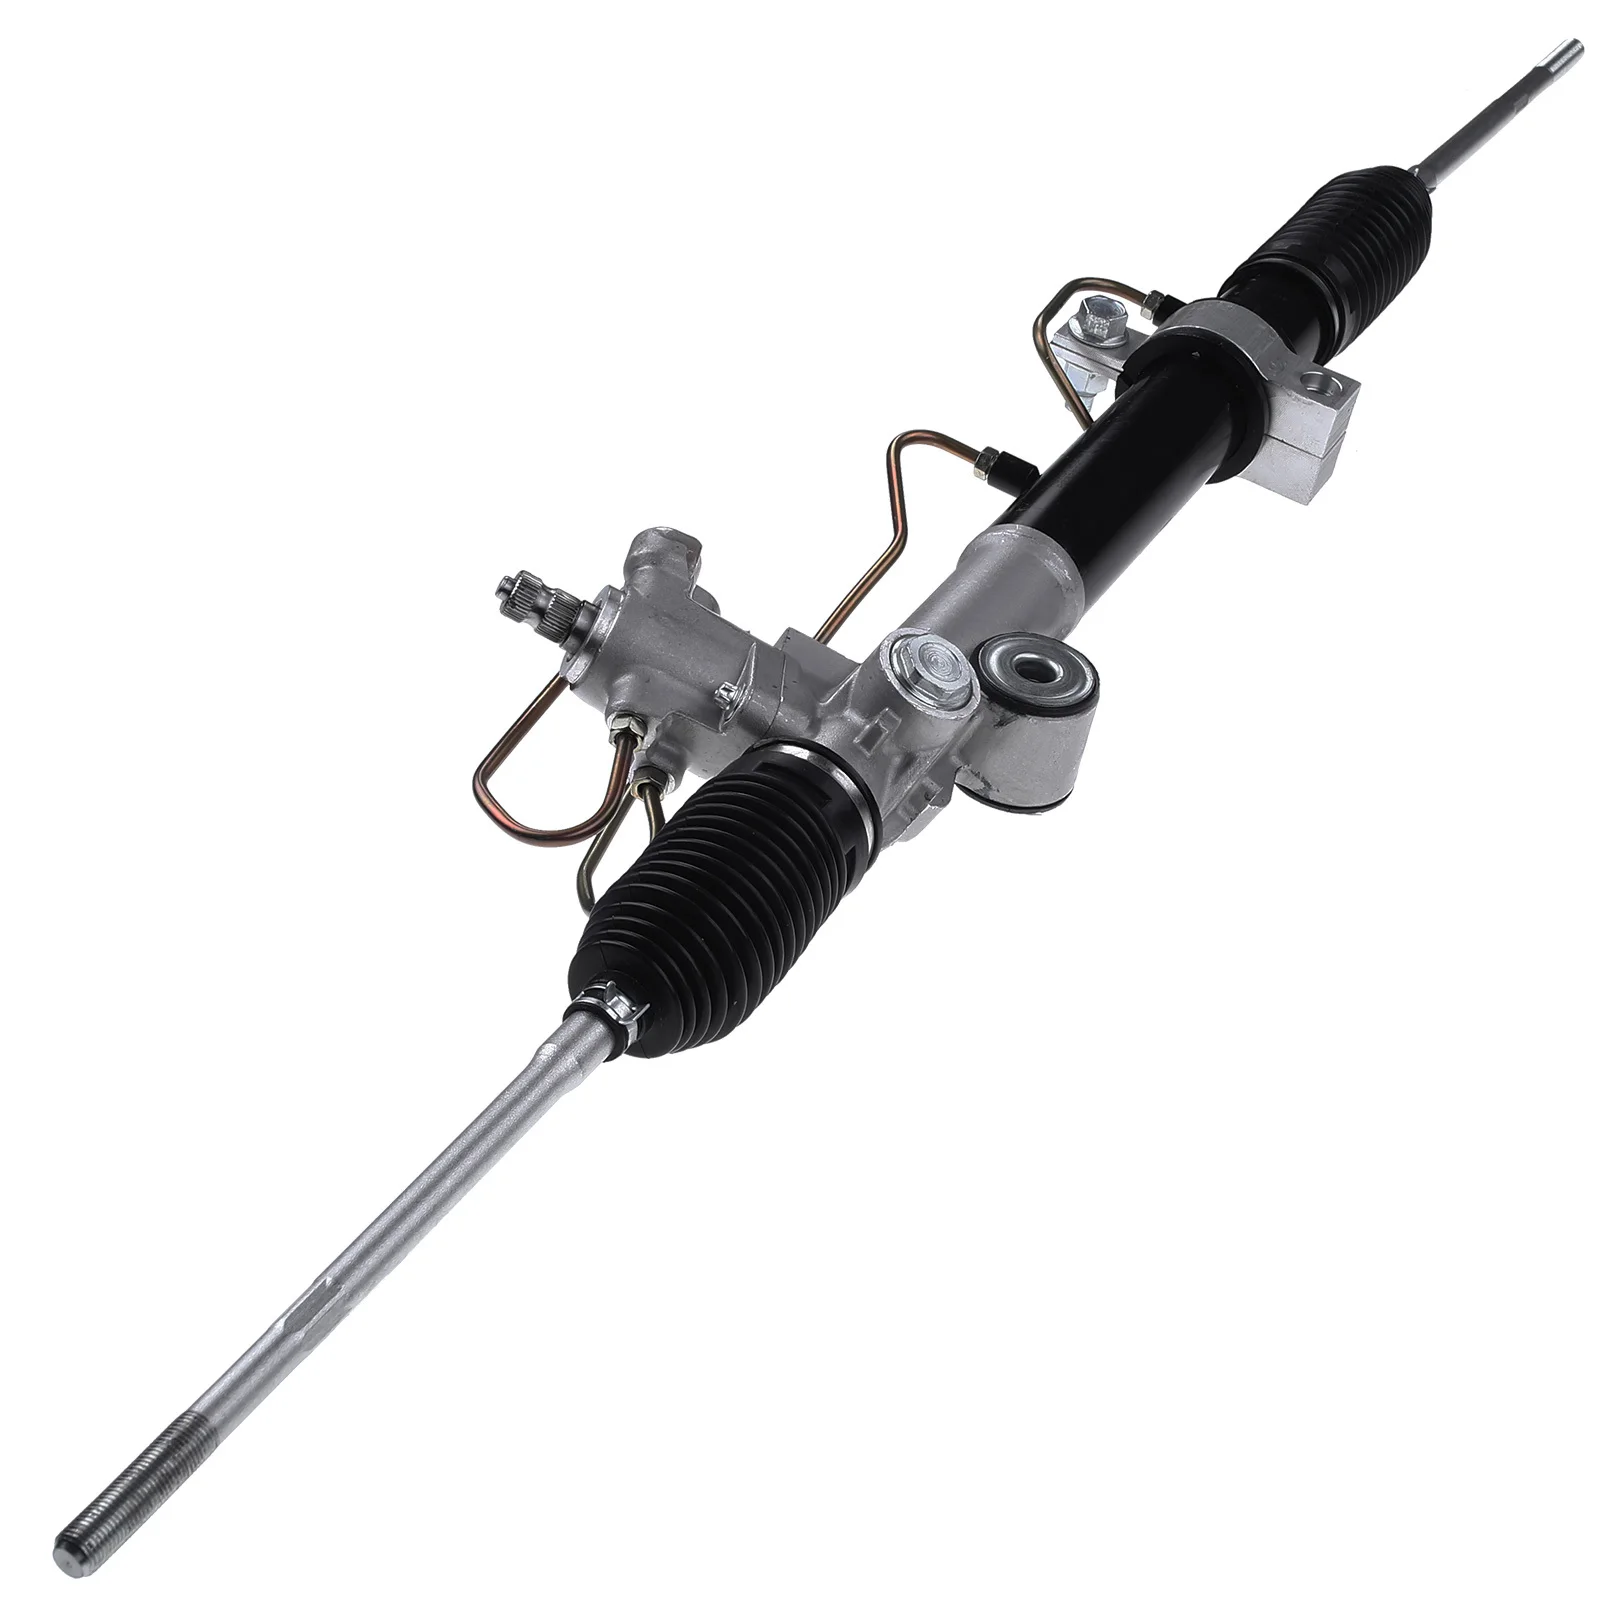 

In-stock CN US Power Steering Rack and Pinion Assembly for Nissan Altima 2002-2006 Maxima 04-08 490018J010